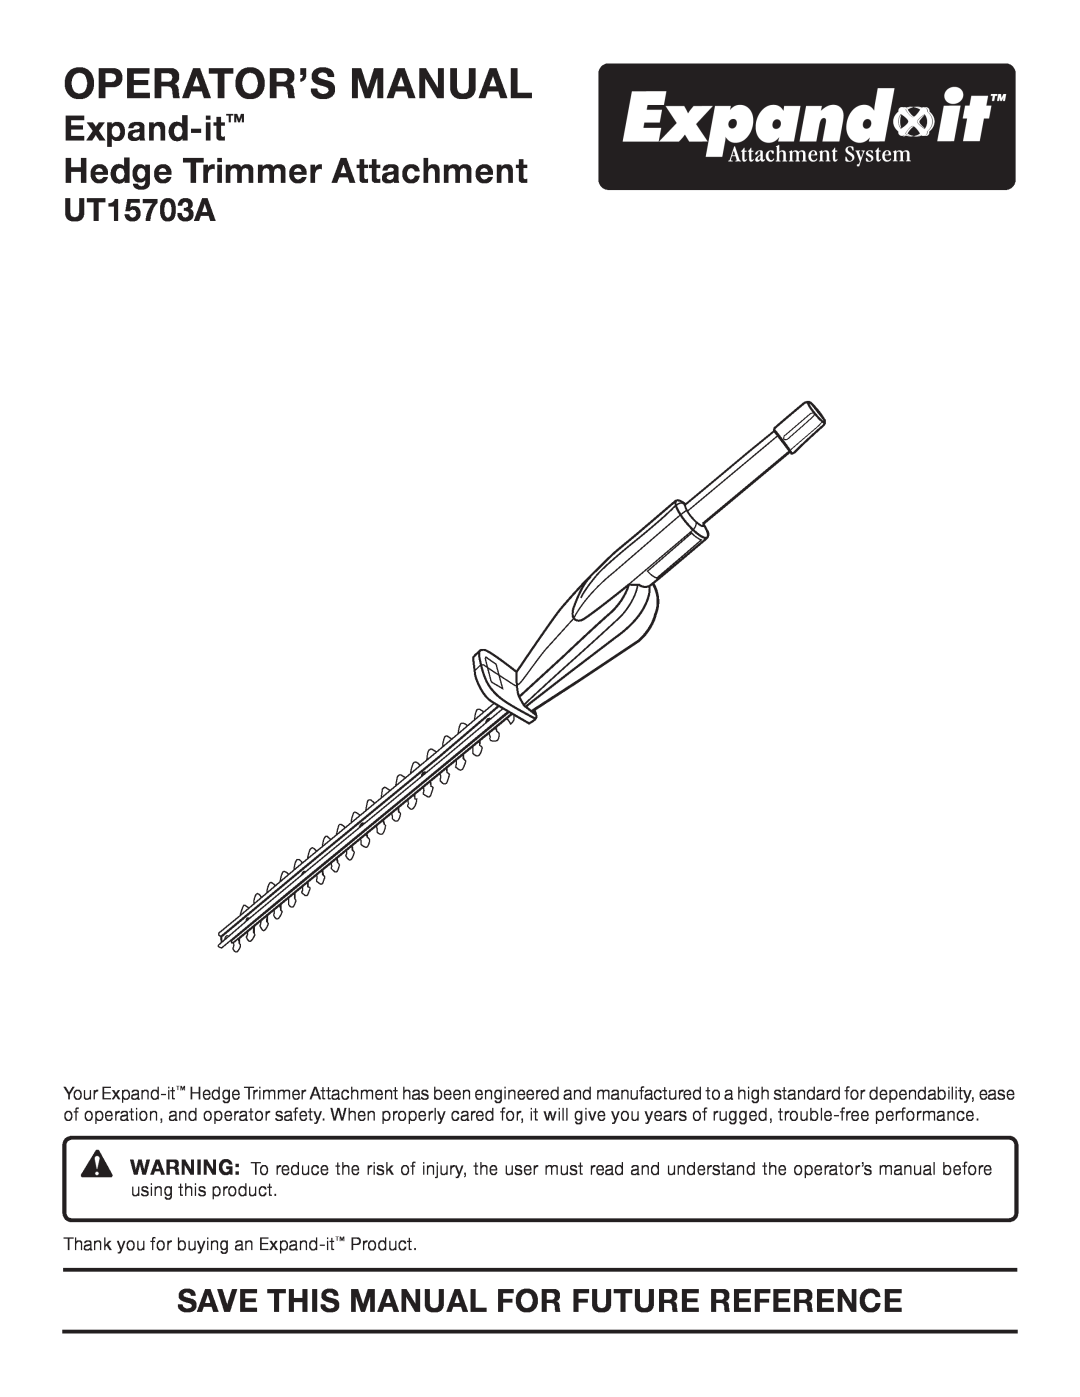 Ryobi UT15703A manual Operator’S Manual, Expand-it Hedge Trimmer Attachment, Save This Manual For Future Reference 